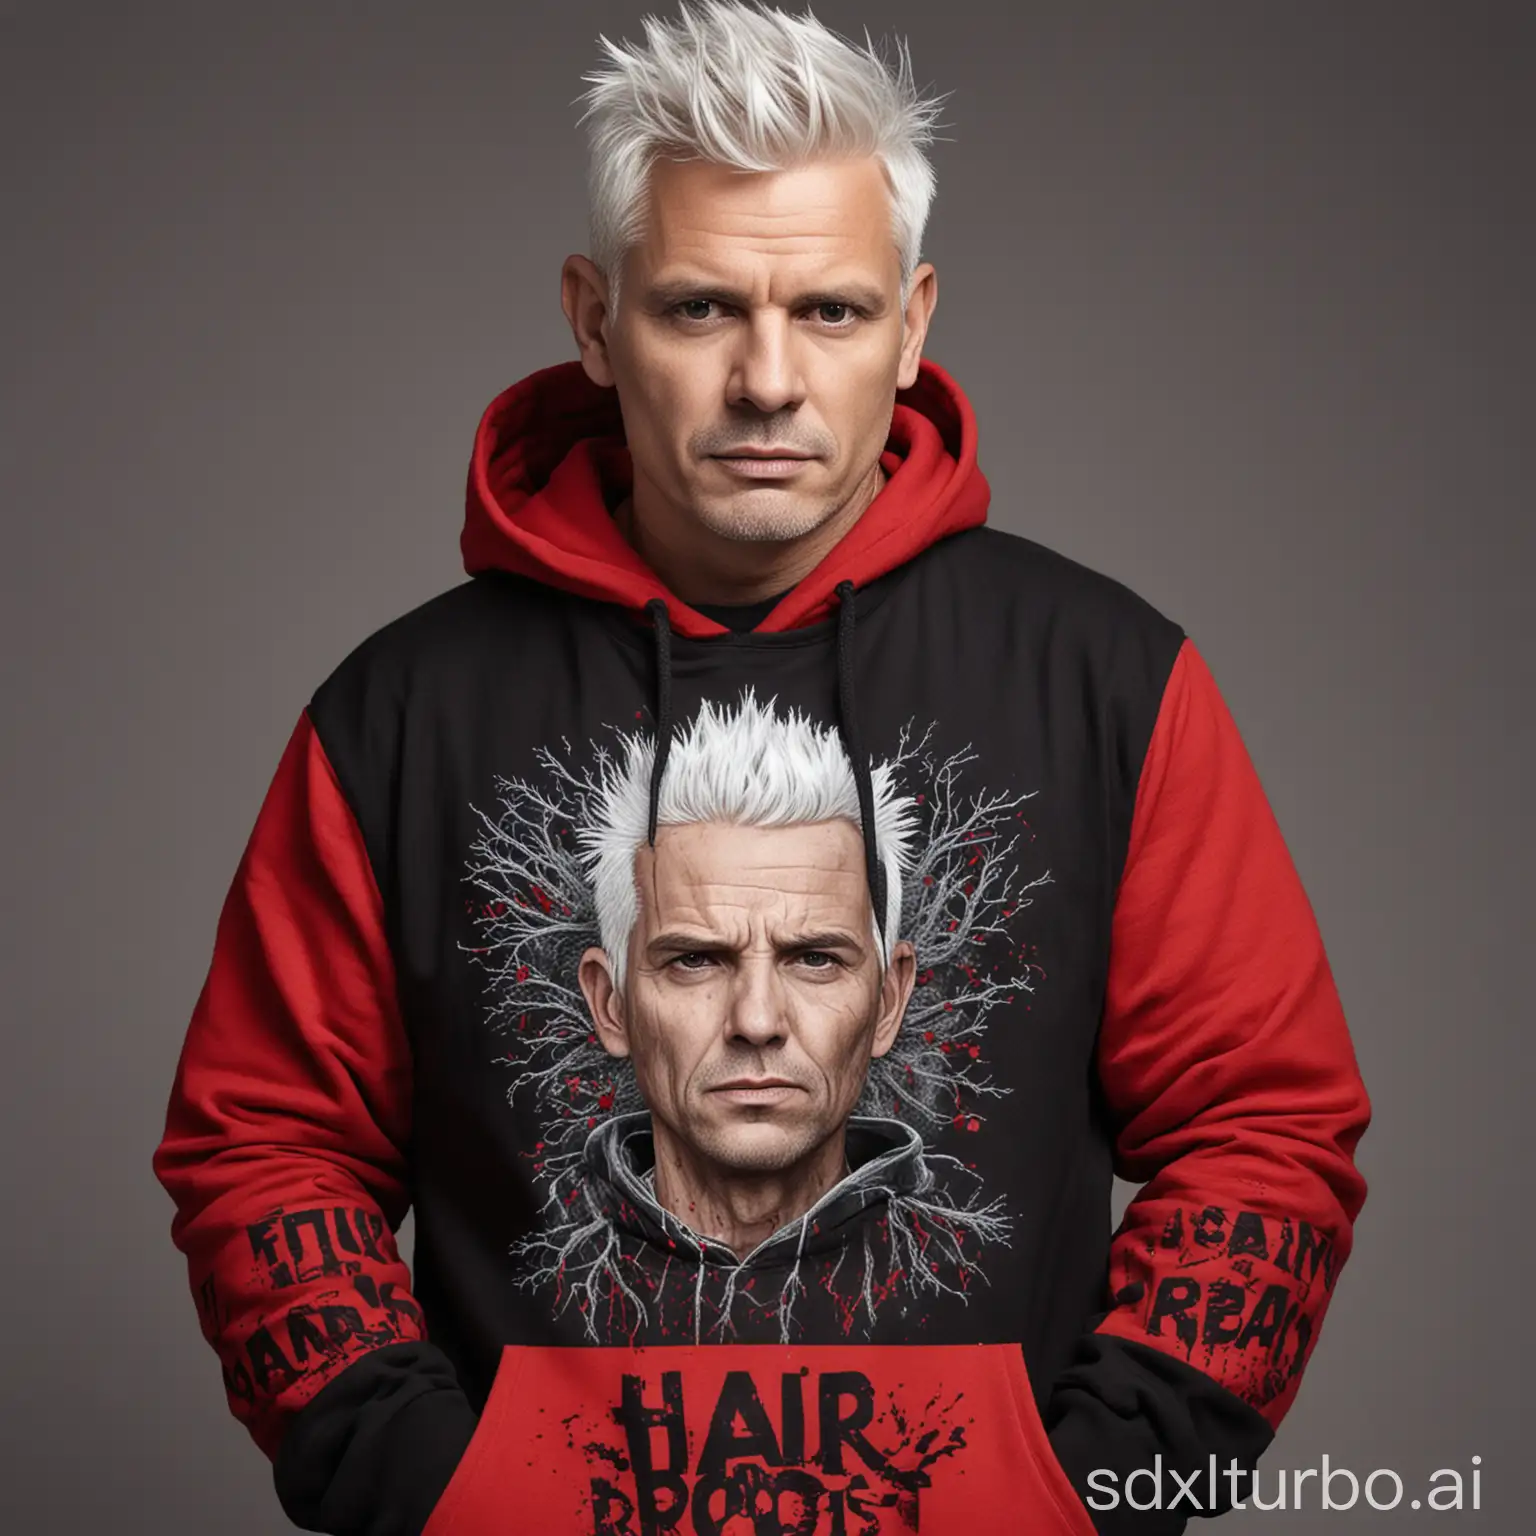 A 50-year-old attractive man with short white hair wears a red/black hoodie with 'Hair Root Spasm' print- Punk, band, hoodie, red-black